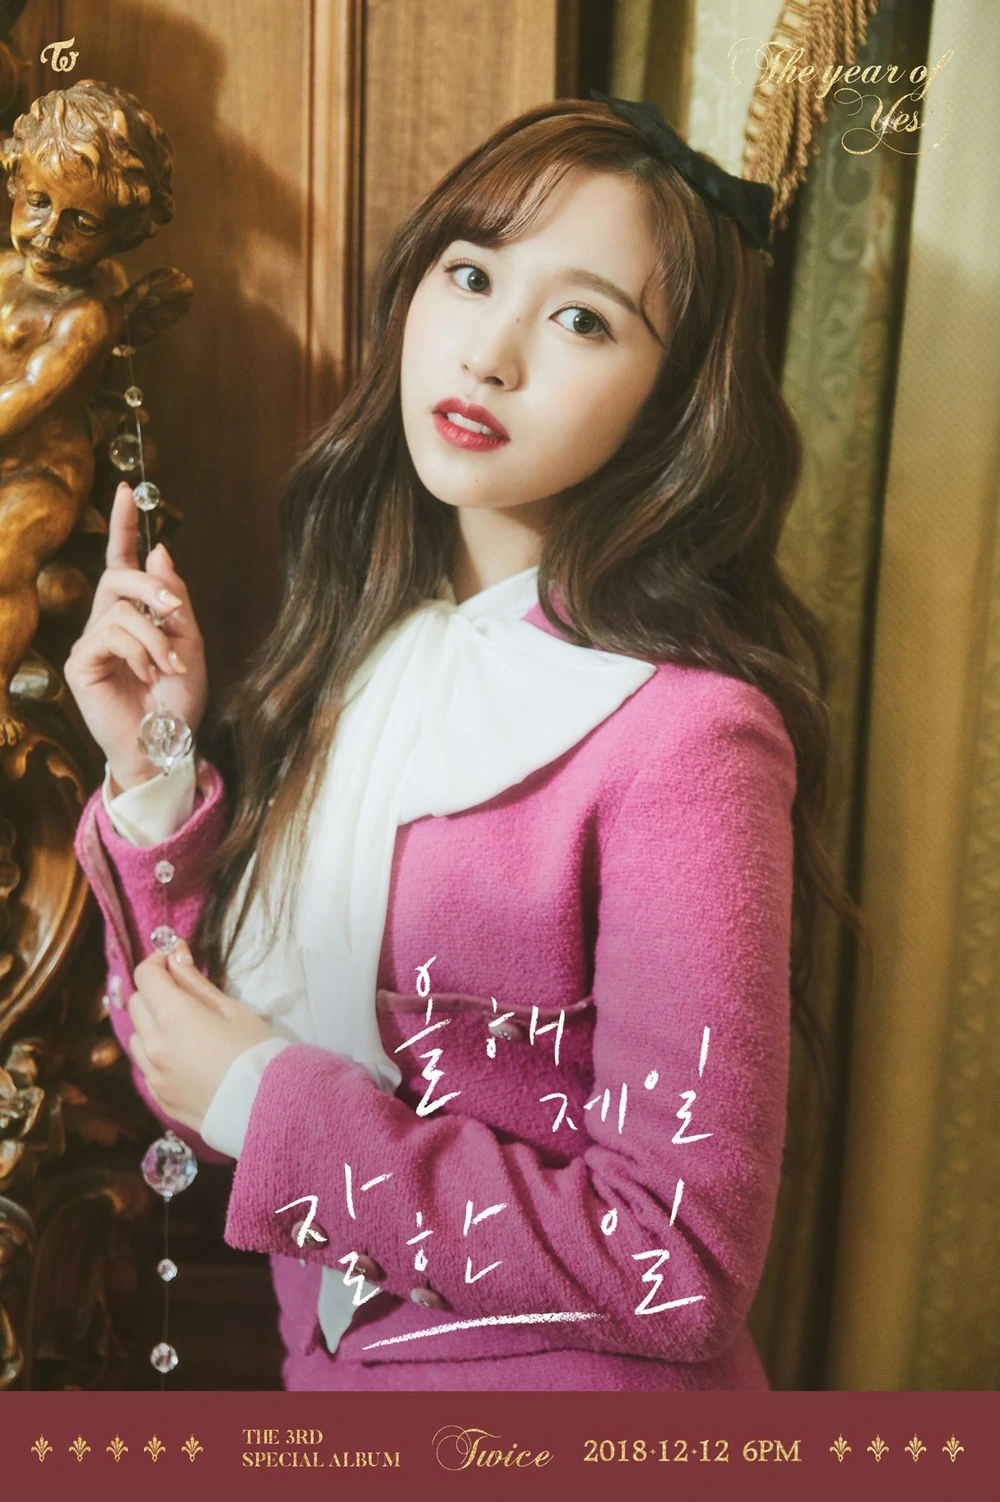 Twice Year Of Yes Mina Concept Teaser Picture Image Photo Kpop K-Concept 2